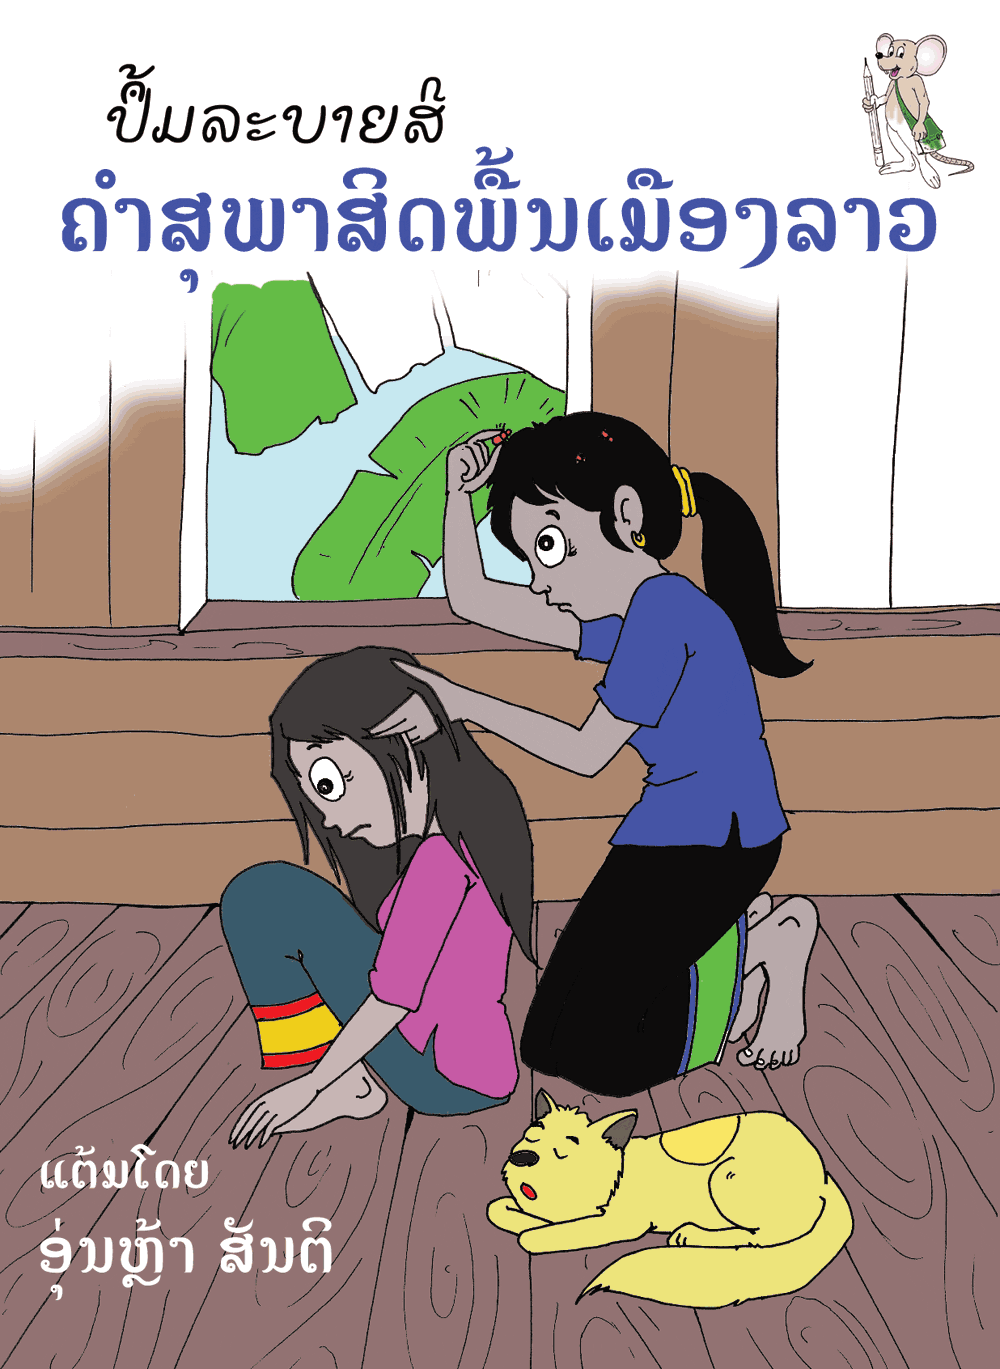 Lao Proverbs Coloring Book large book cover, published in Lao language